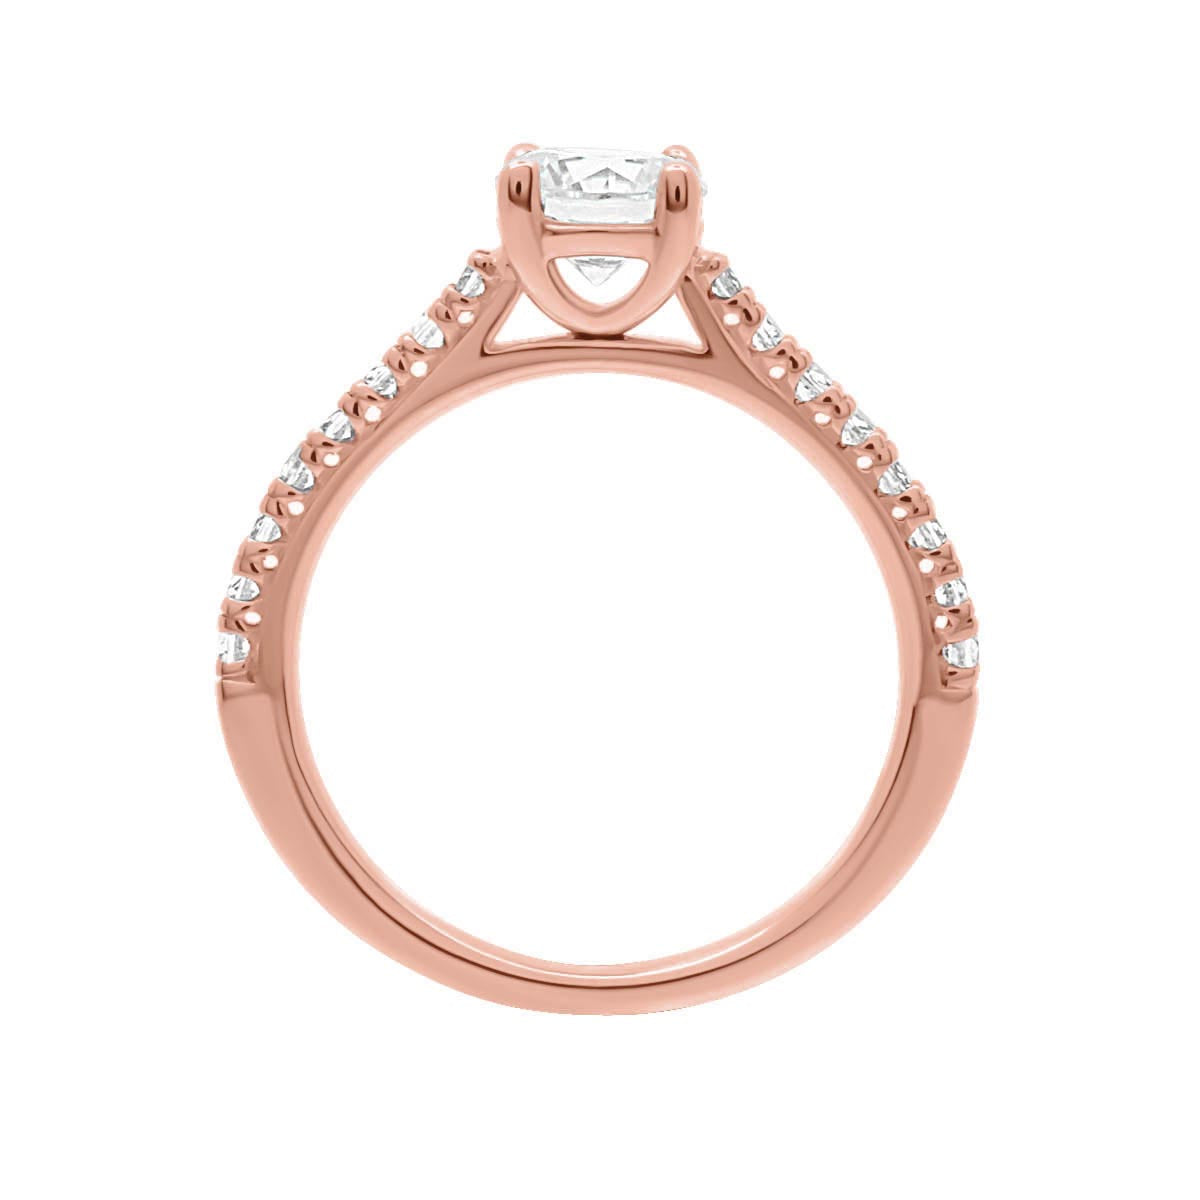 Castell Set Diamond Ring made from rose gold pictured with a diamond wedding ring